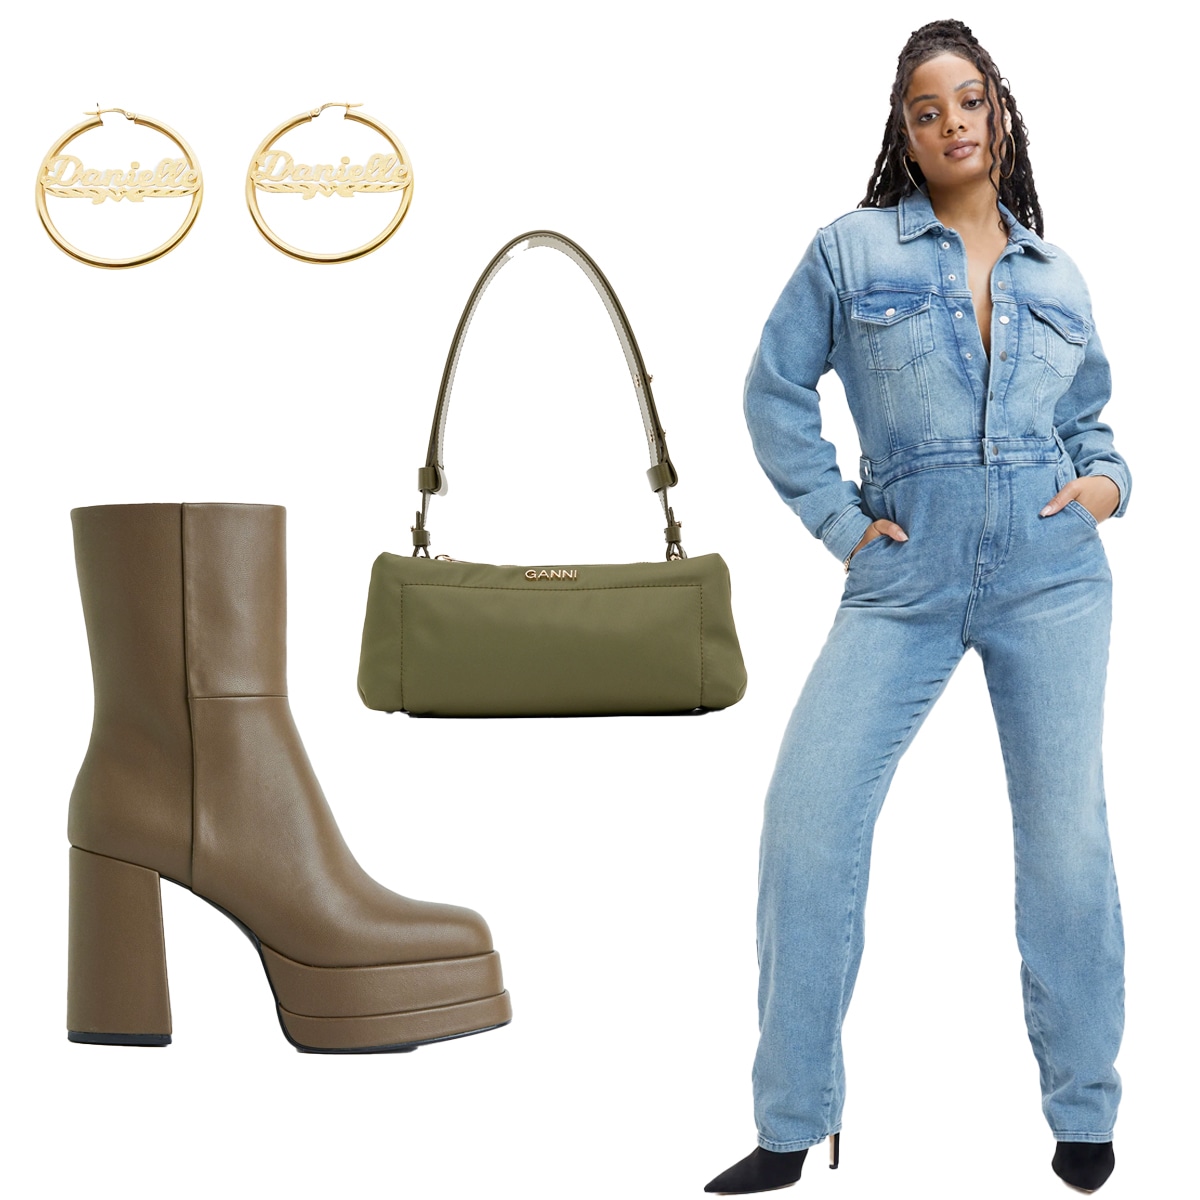 greedy wrench beach Shop the Best Denim Jumpsuits, Plus Four Trendy Ways to Style the Look - E!  Online